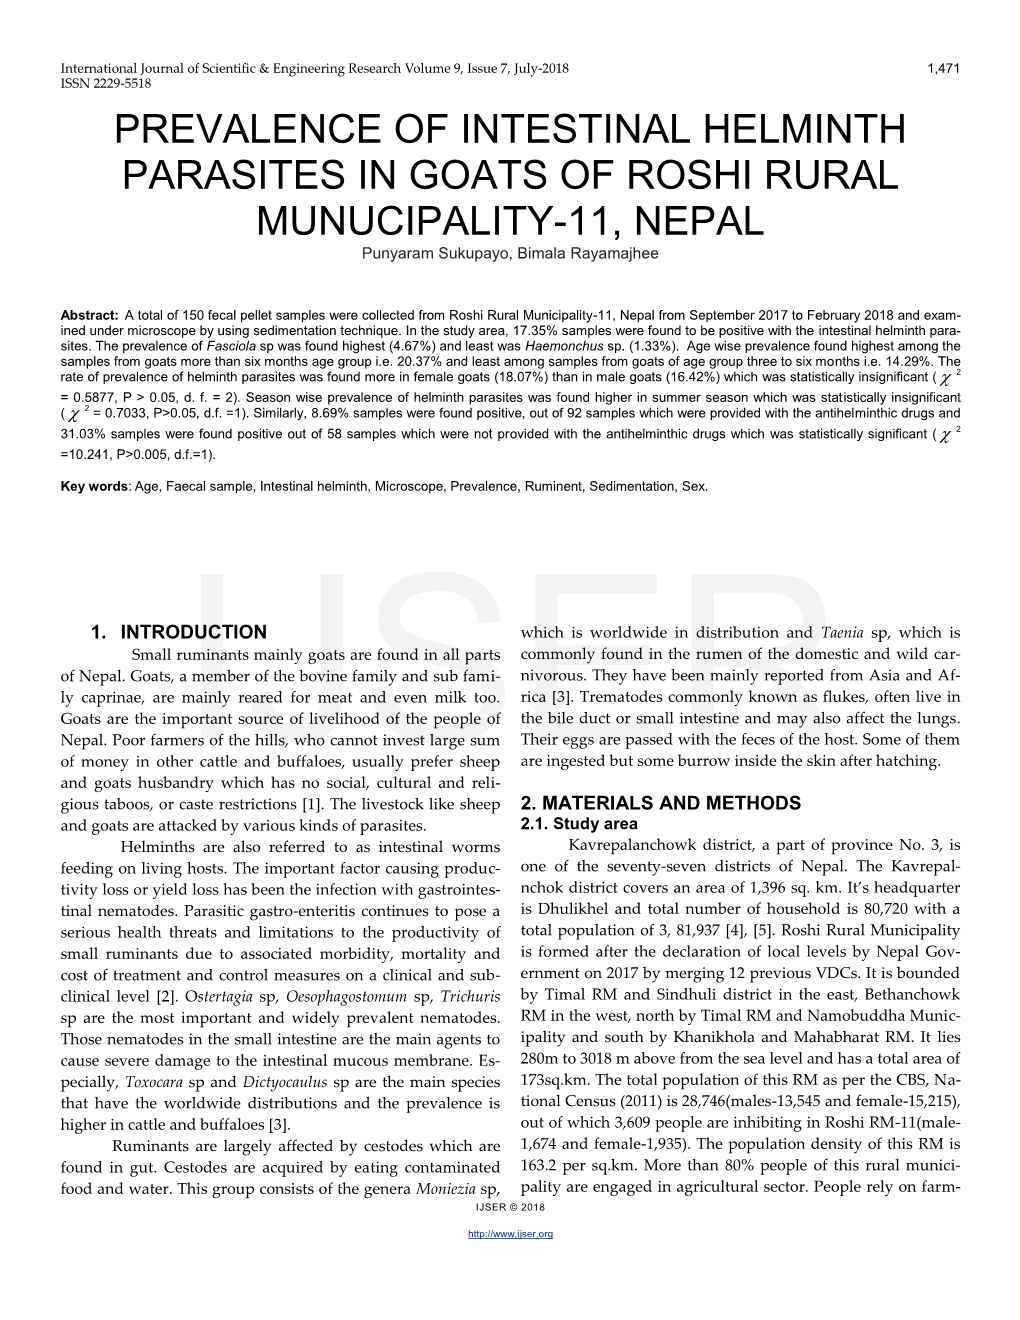 Prevalence of Intestinal Helminth Parasites in Goats of Roshi Rural Munucipality-11, Nepal